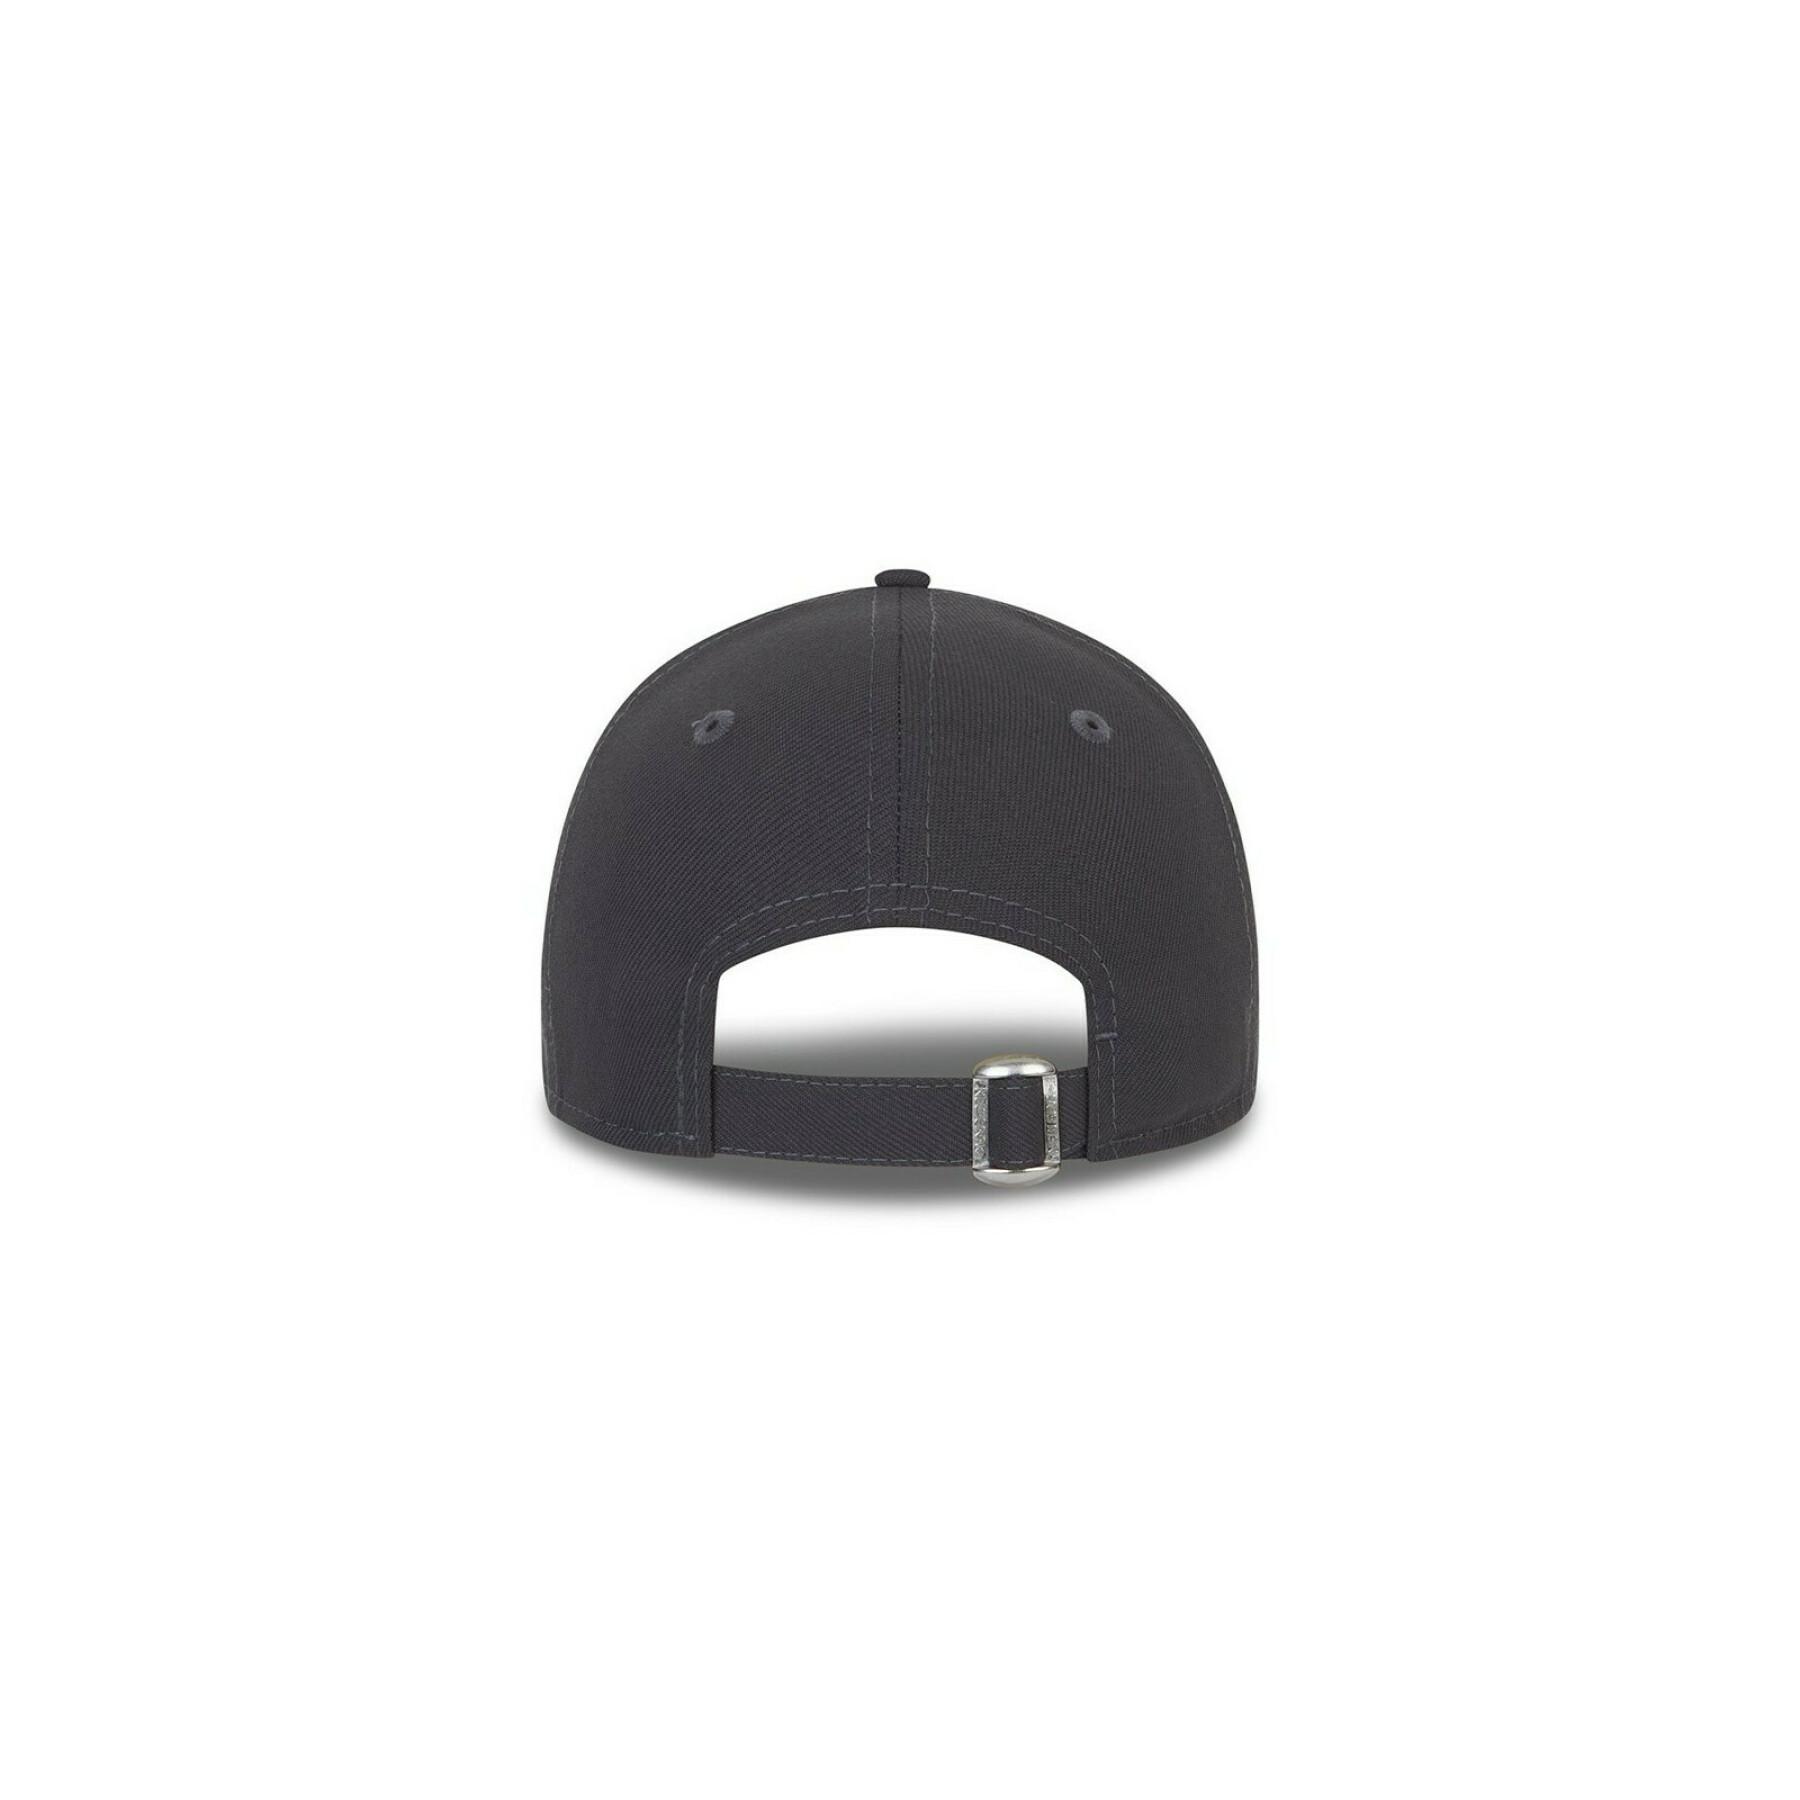 Casquette New Era 9forty New York Yankees neon pack